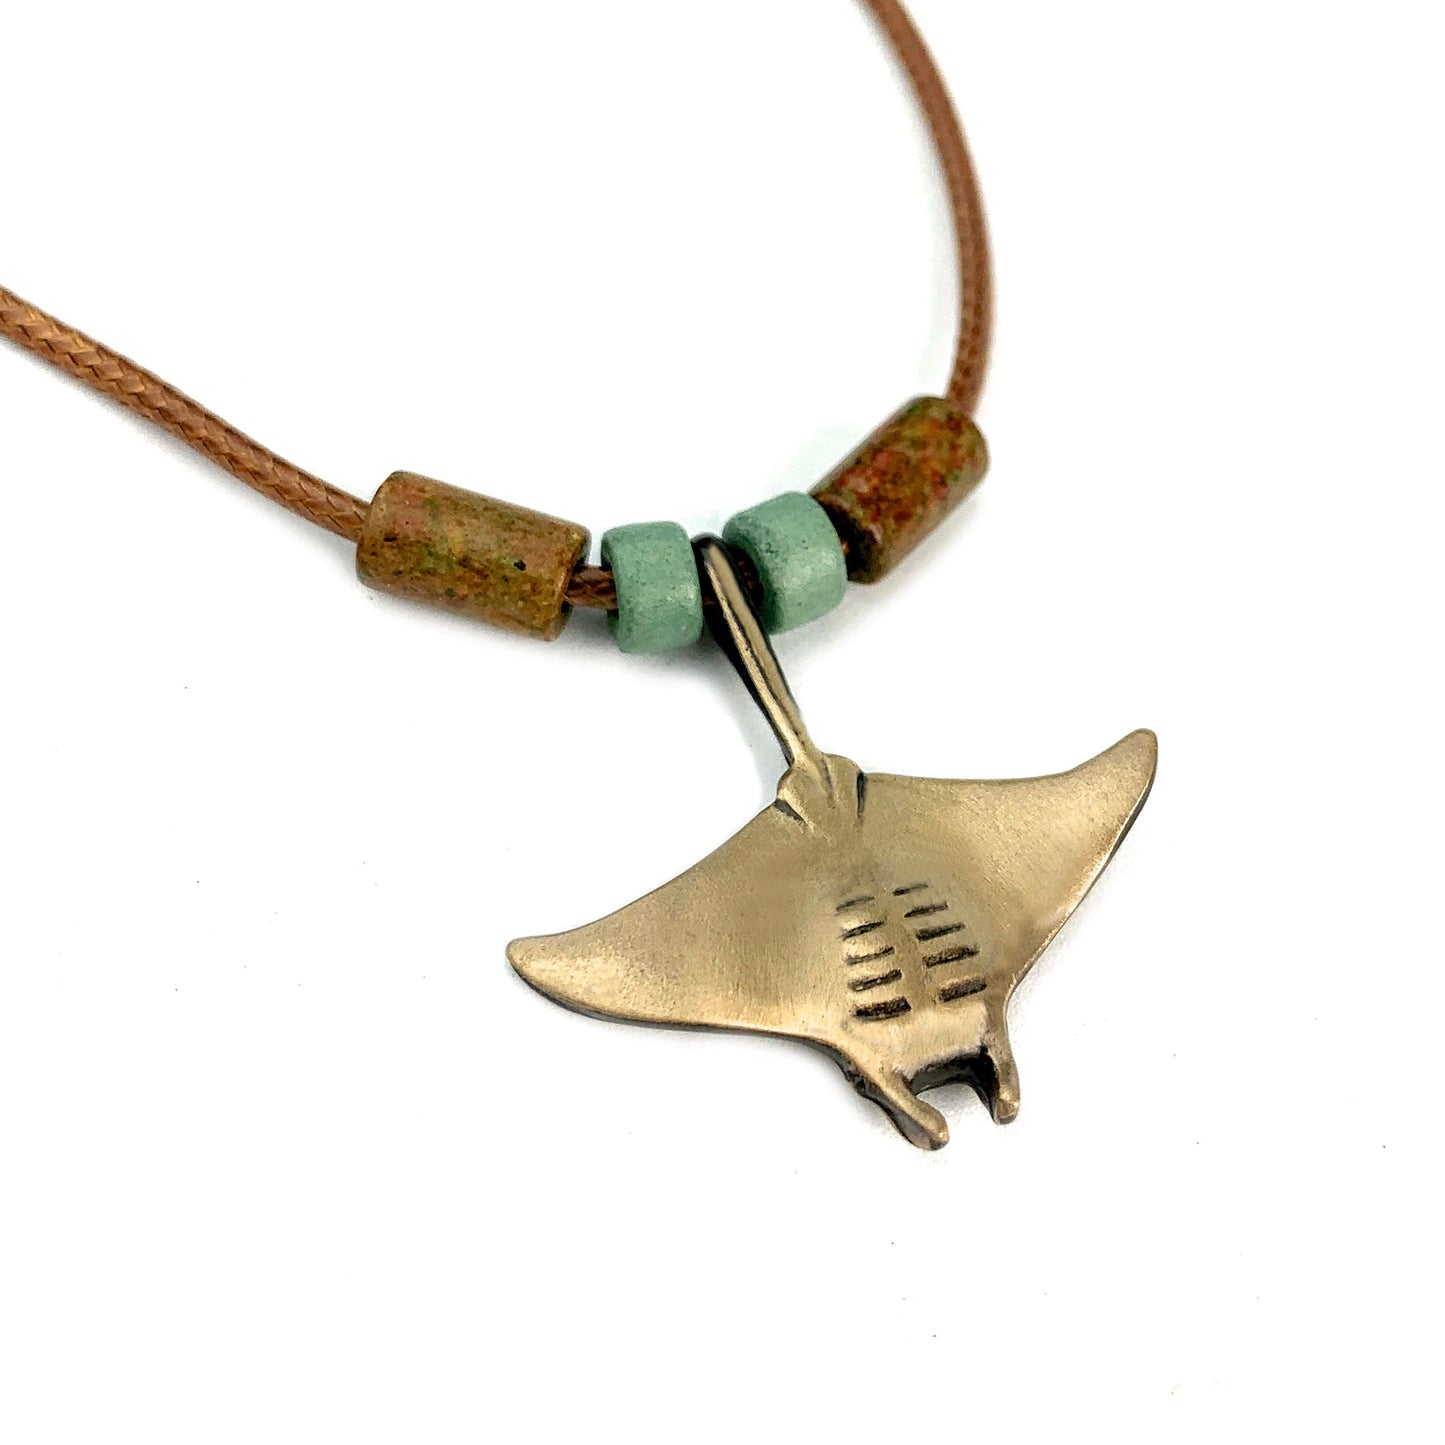 Stingray Necklace Antique Bronze- Manta Ray Necklace for Women | Bronze Stingray Necklace | Stingray Jewelry | Manta Ray Pendant  Scuba Diving Jewelry - The Tool Store